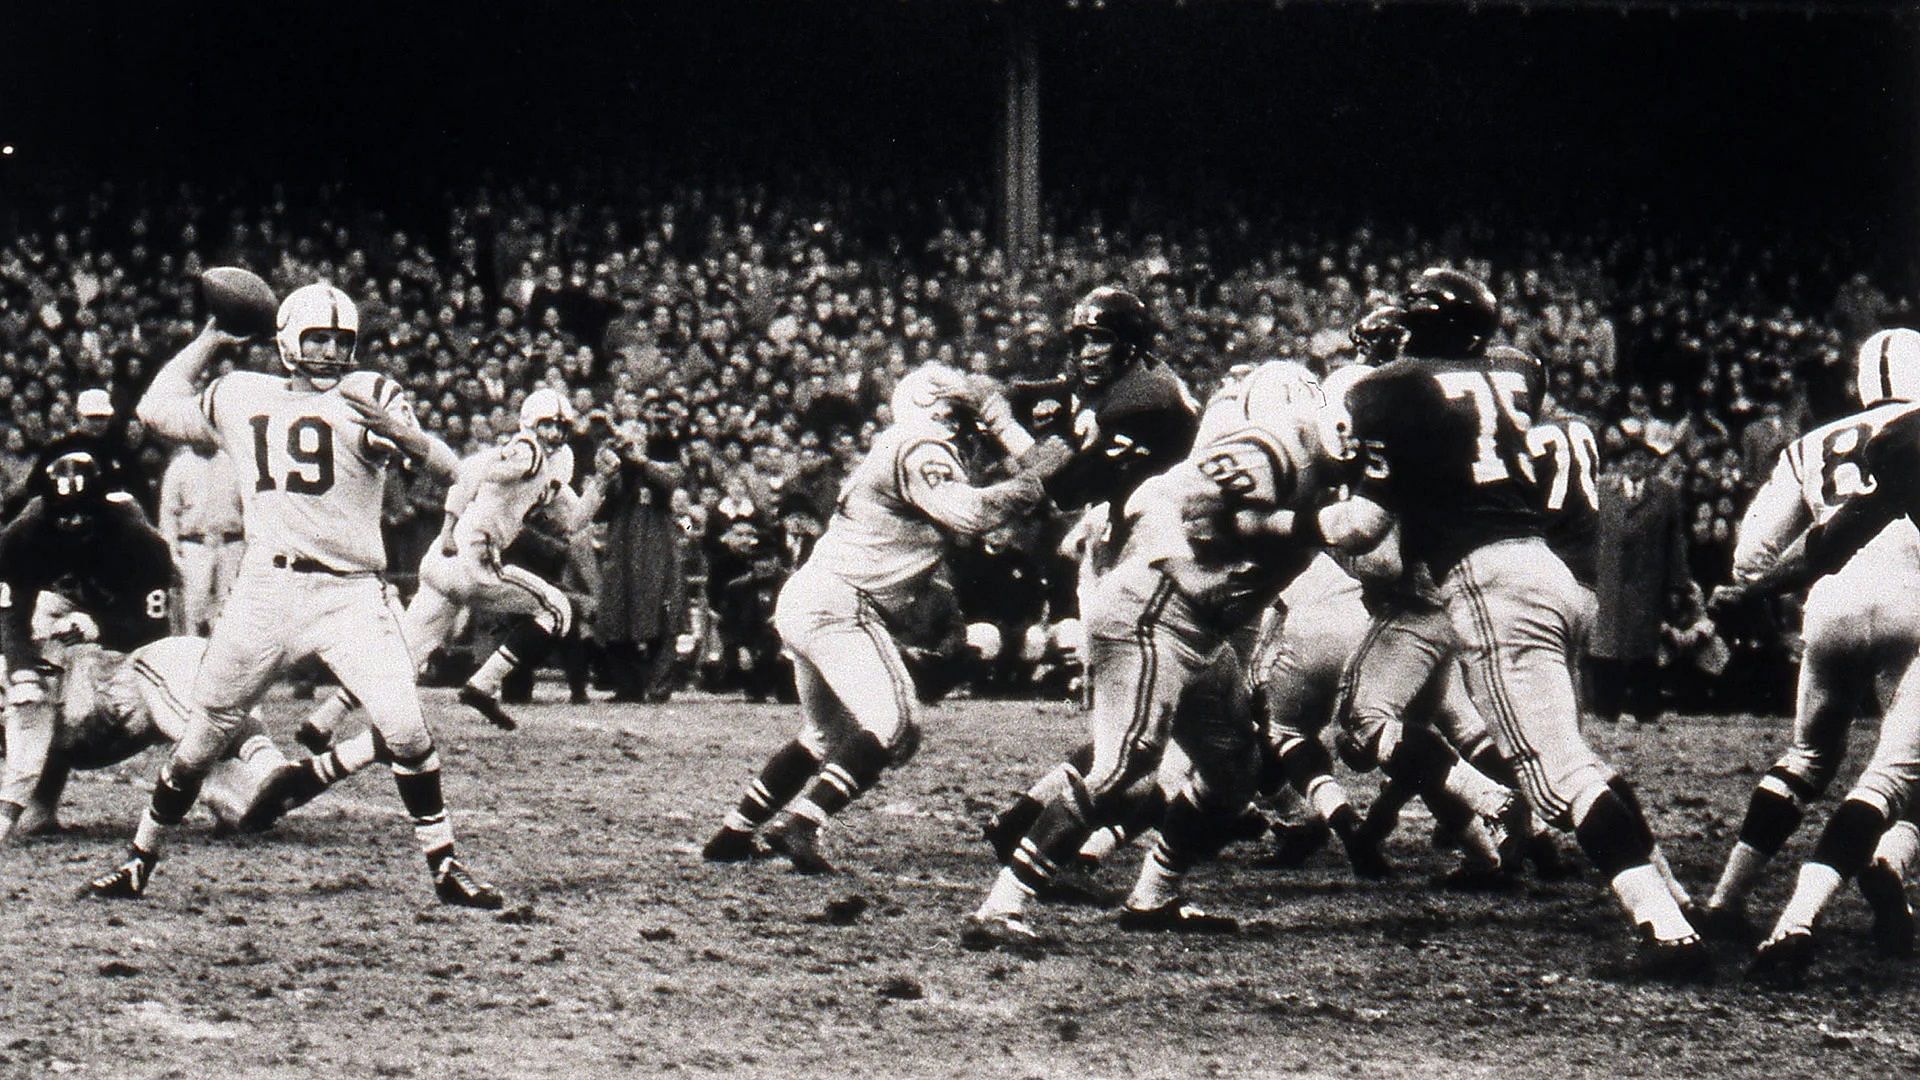 New York battles Chicago in the 1956 NFL Championship game. Photo via giants.com